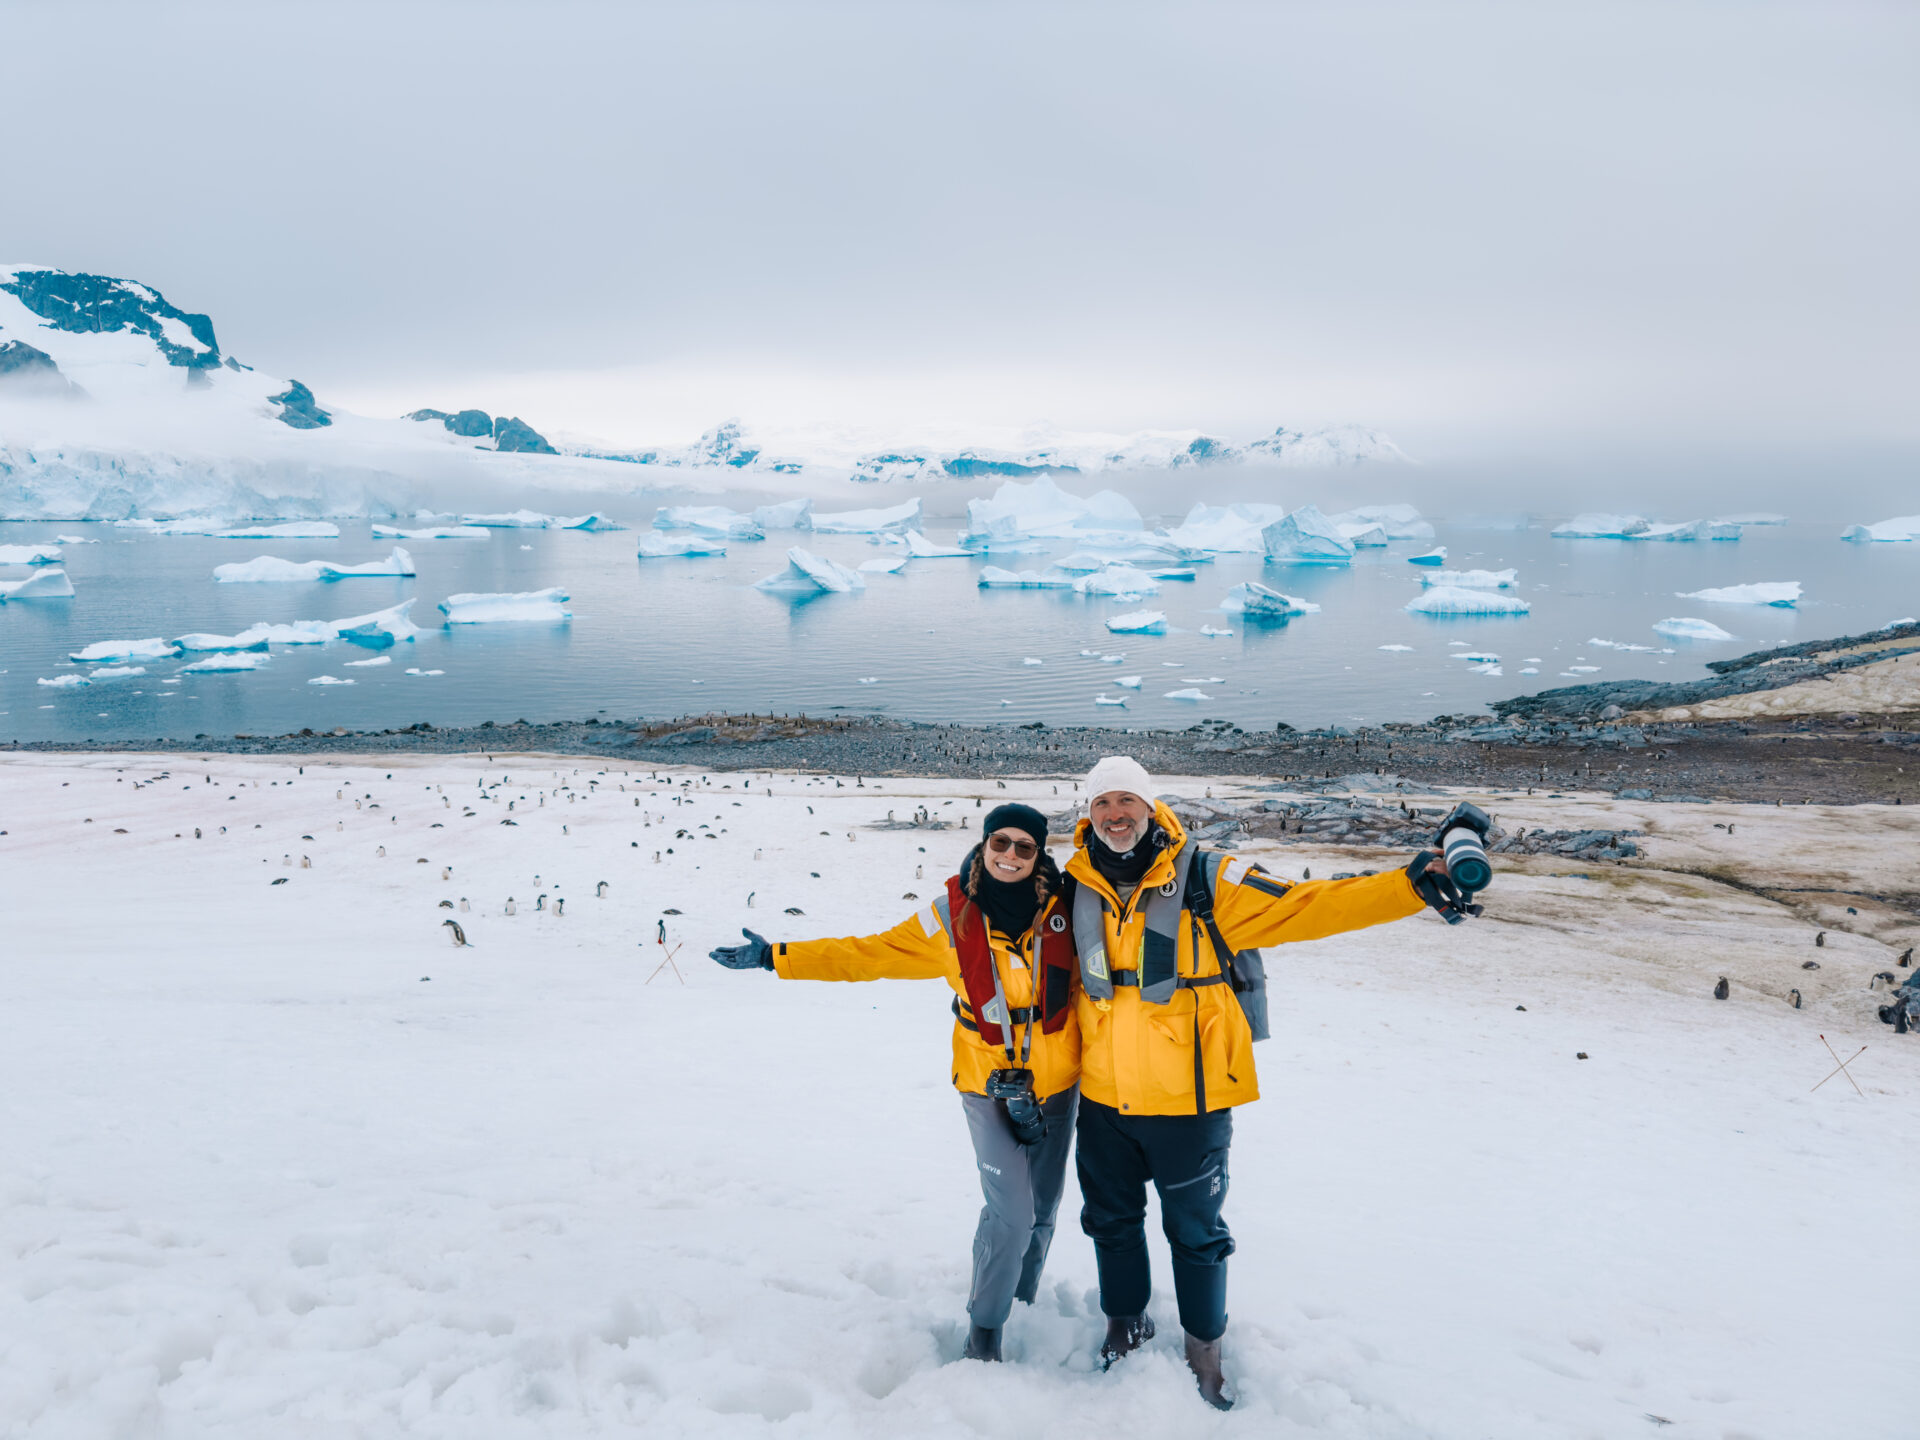 Our time in Antartica